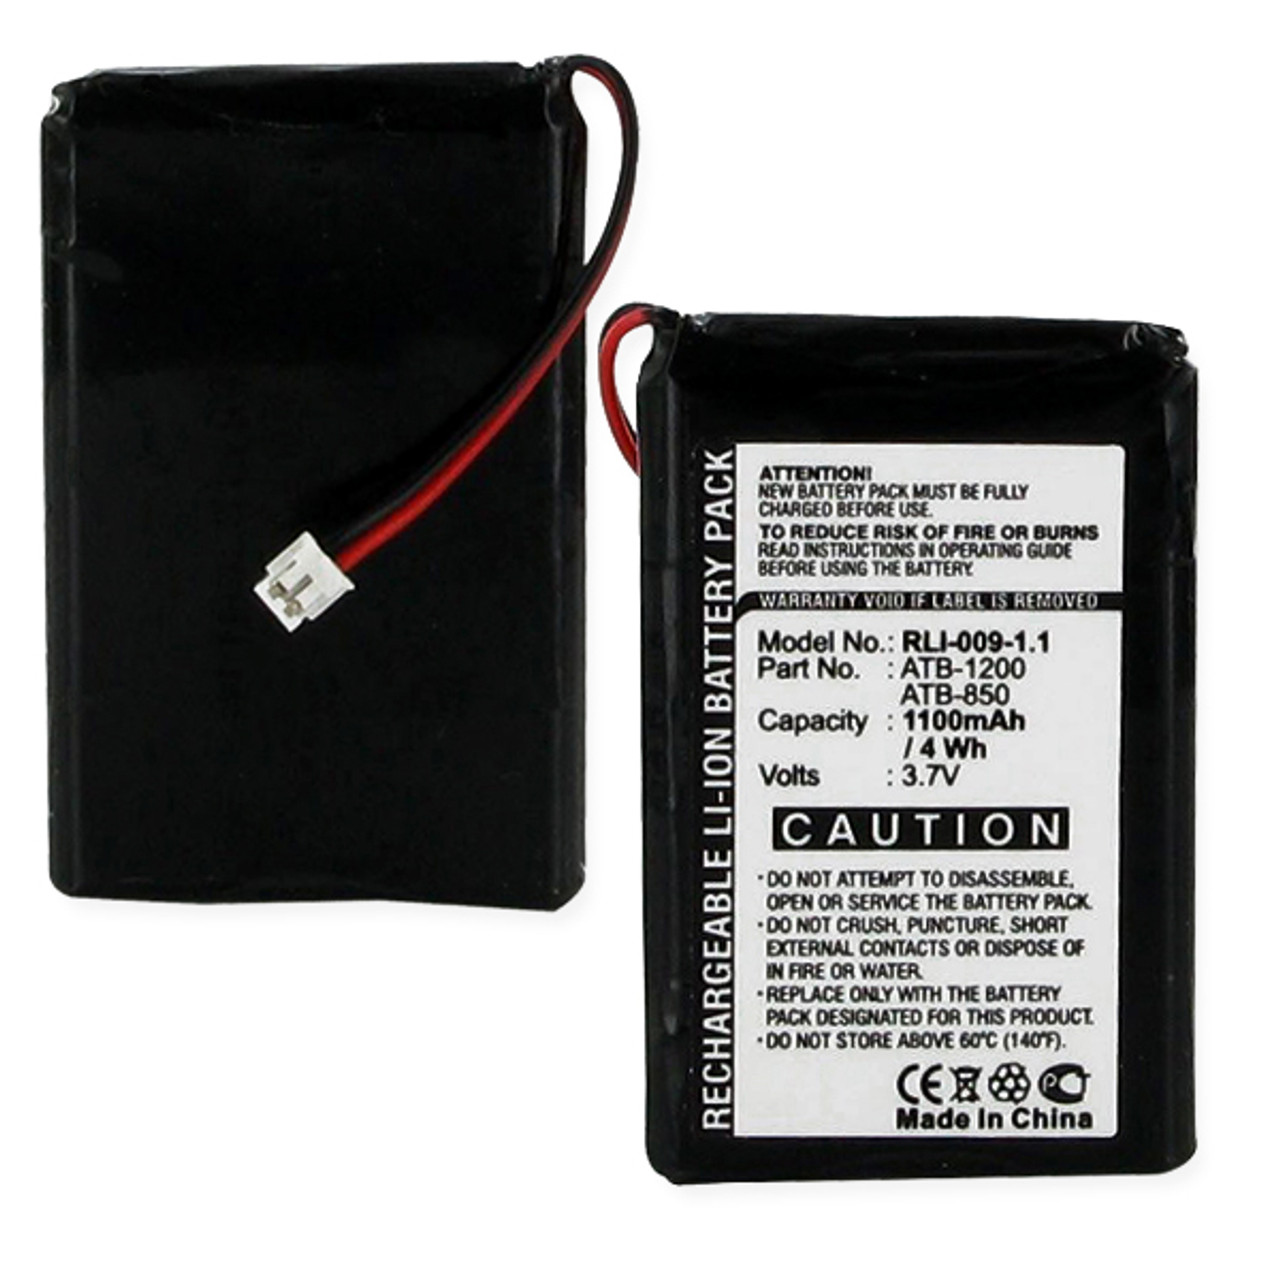 RTI ATB-850 Battery Replacement for Remote Control